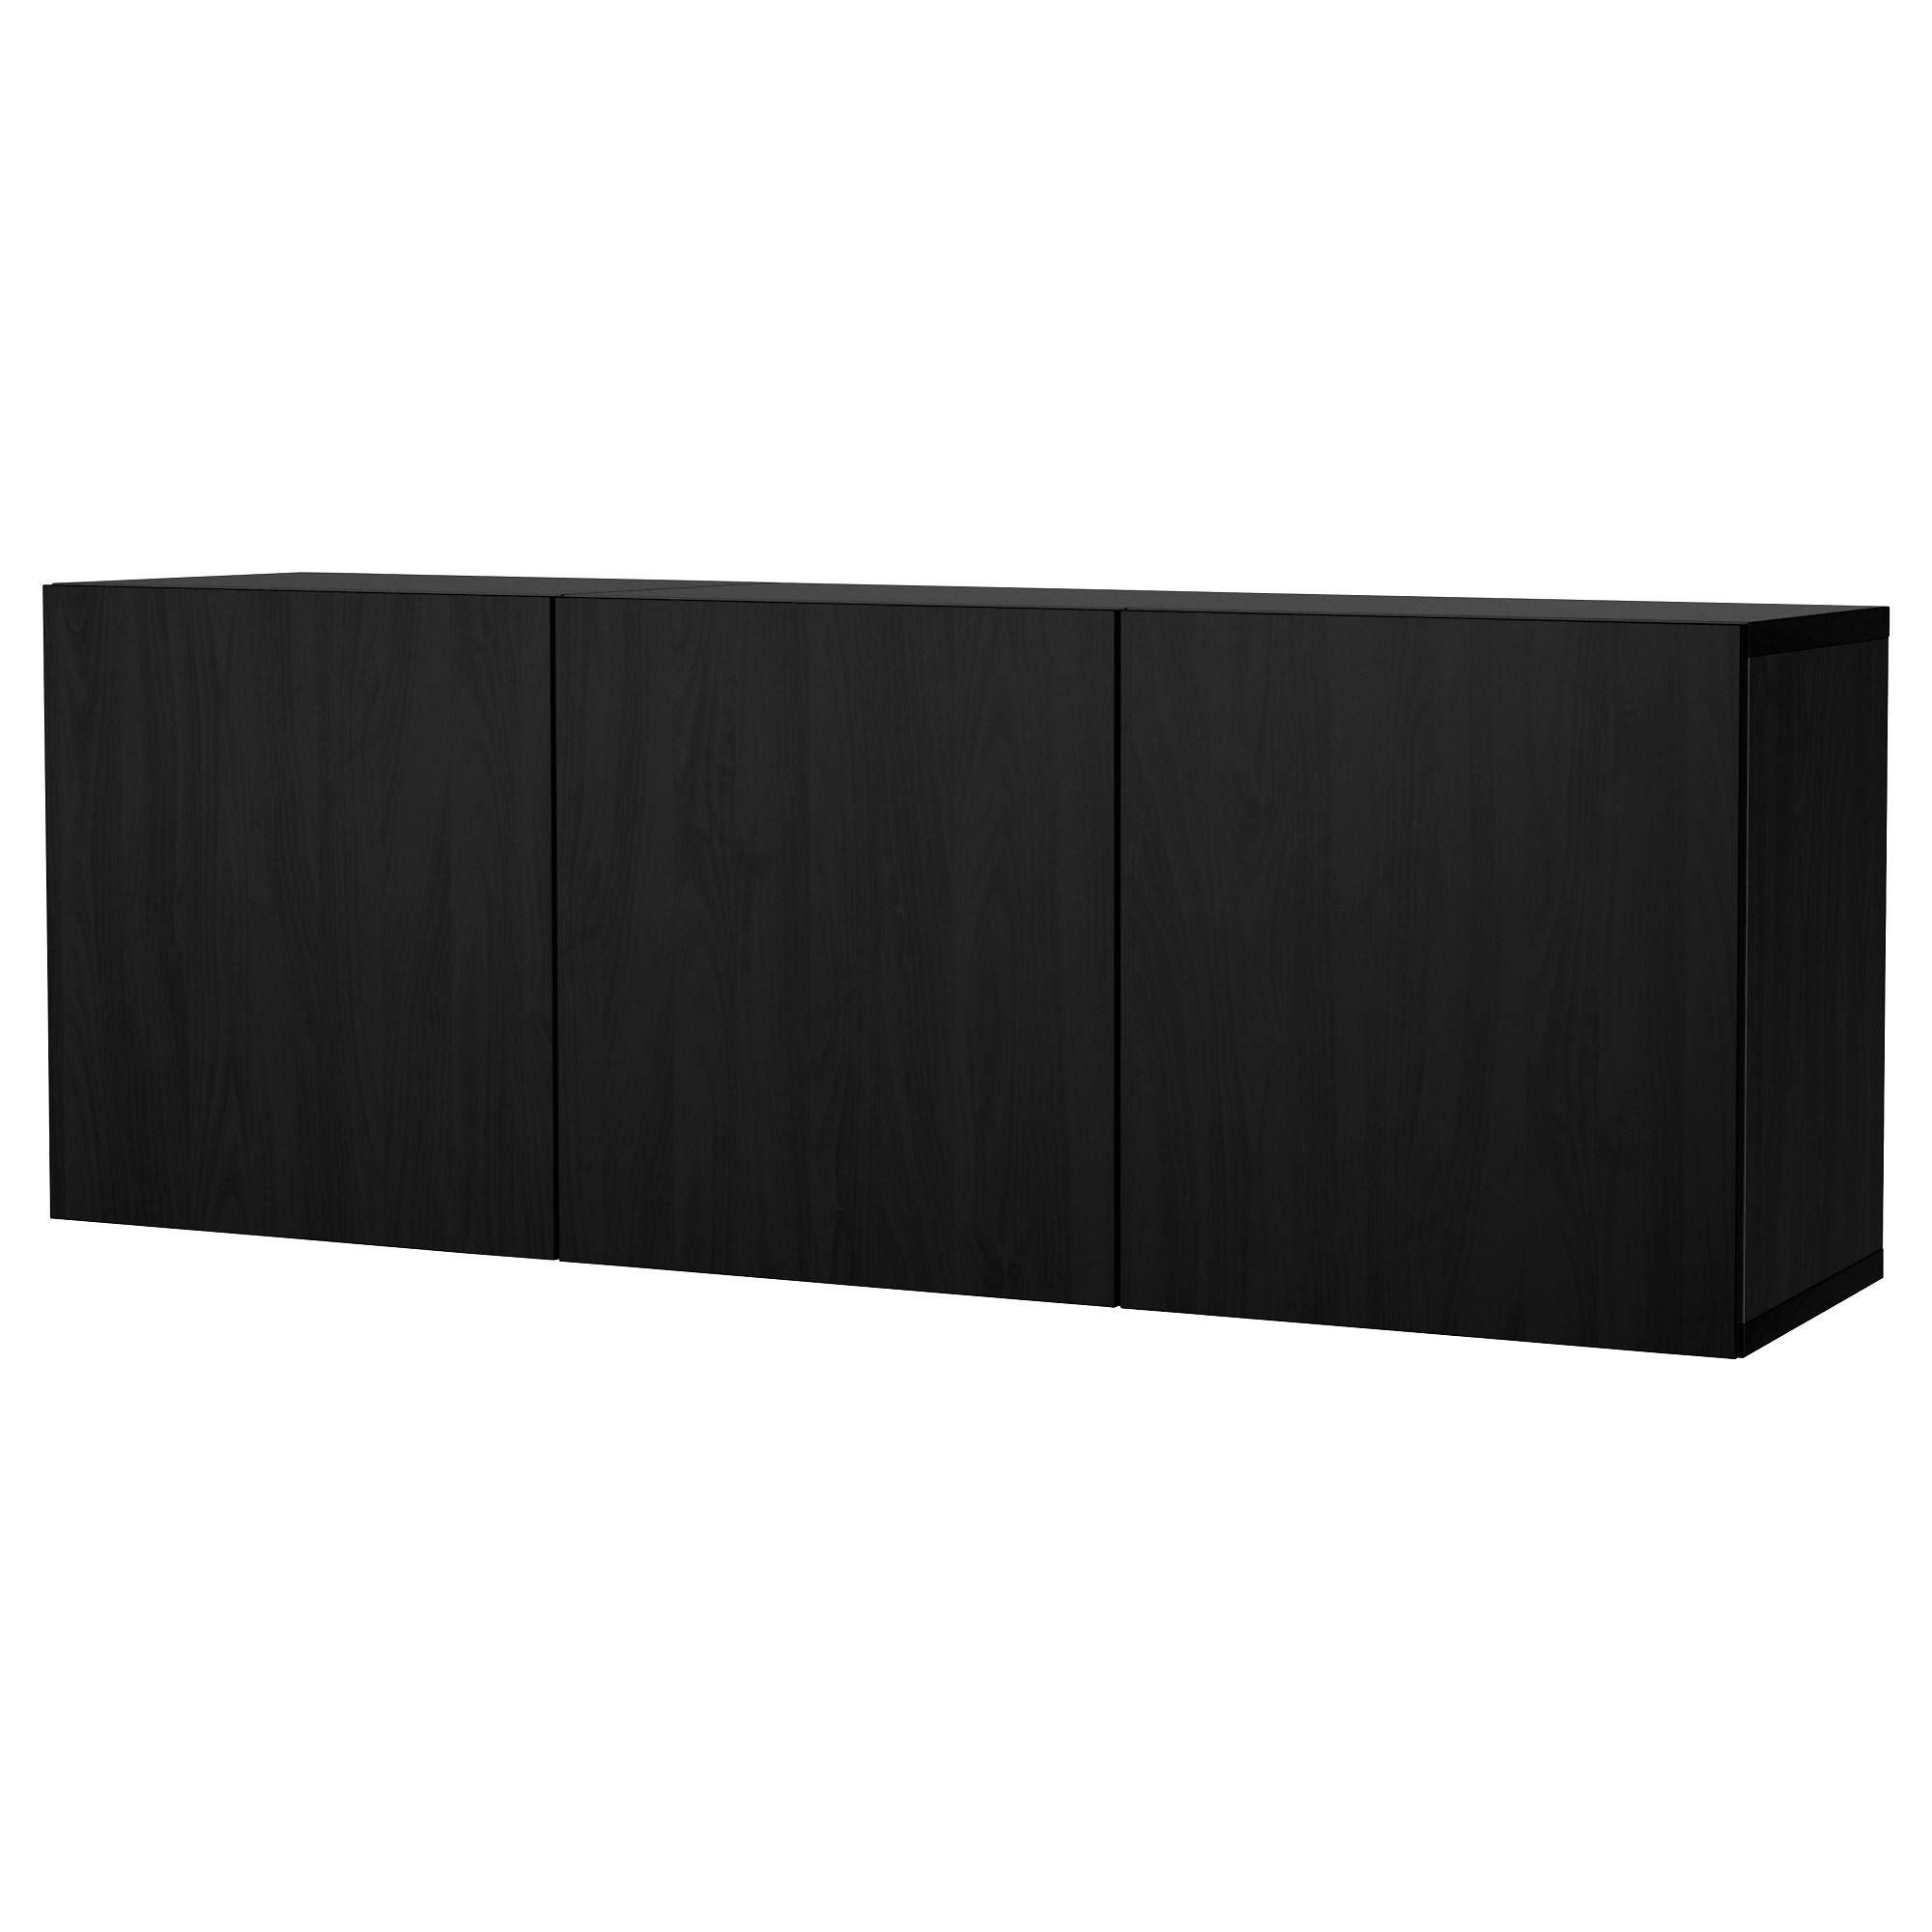 Bestå System – Combinations & Tv Benches – Ikea Intended For Black Brown Sideboards (View 10 of 15)